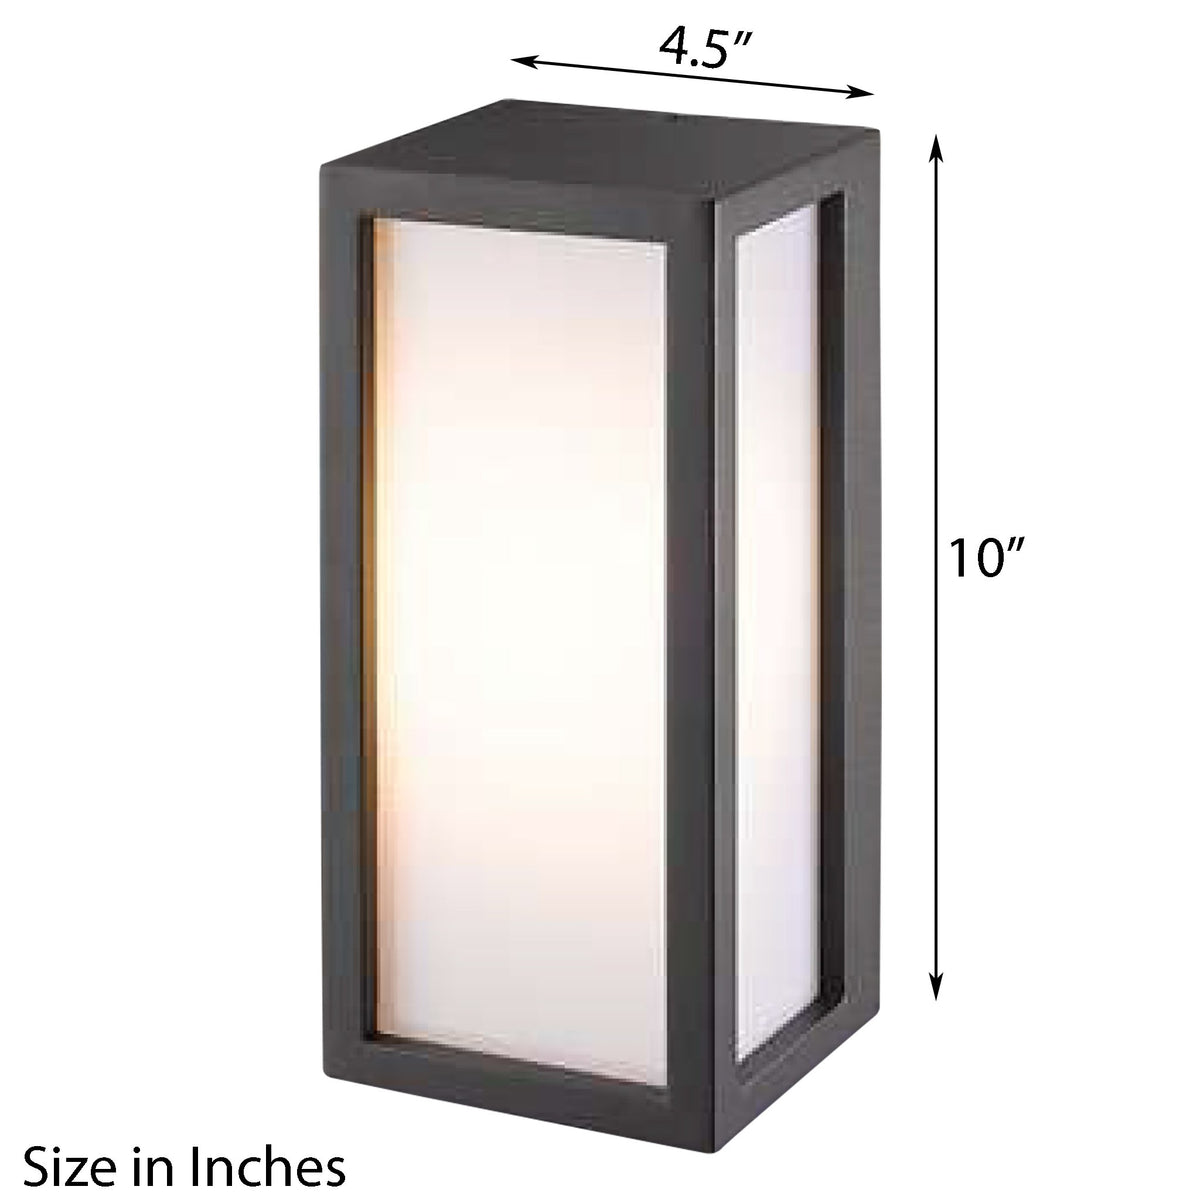 R-Bright LED Outdoor Wall Light Shop